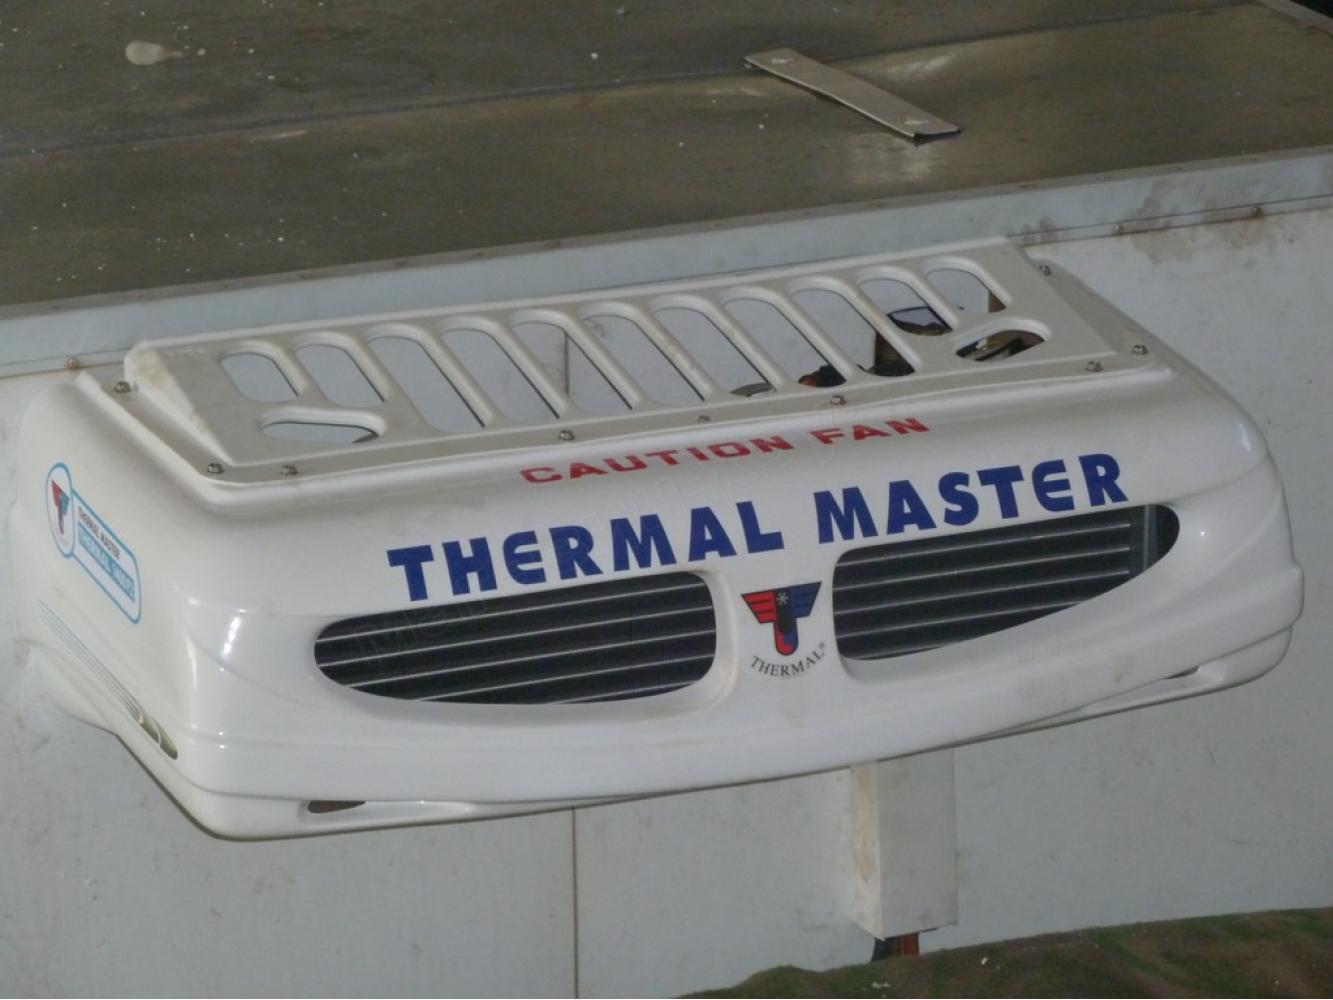 Мастер 1400. Thermal Master t2500. Thermal Master н2500. Thermal Master 1400 f2. Thermal Master 2500 блок.